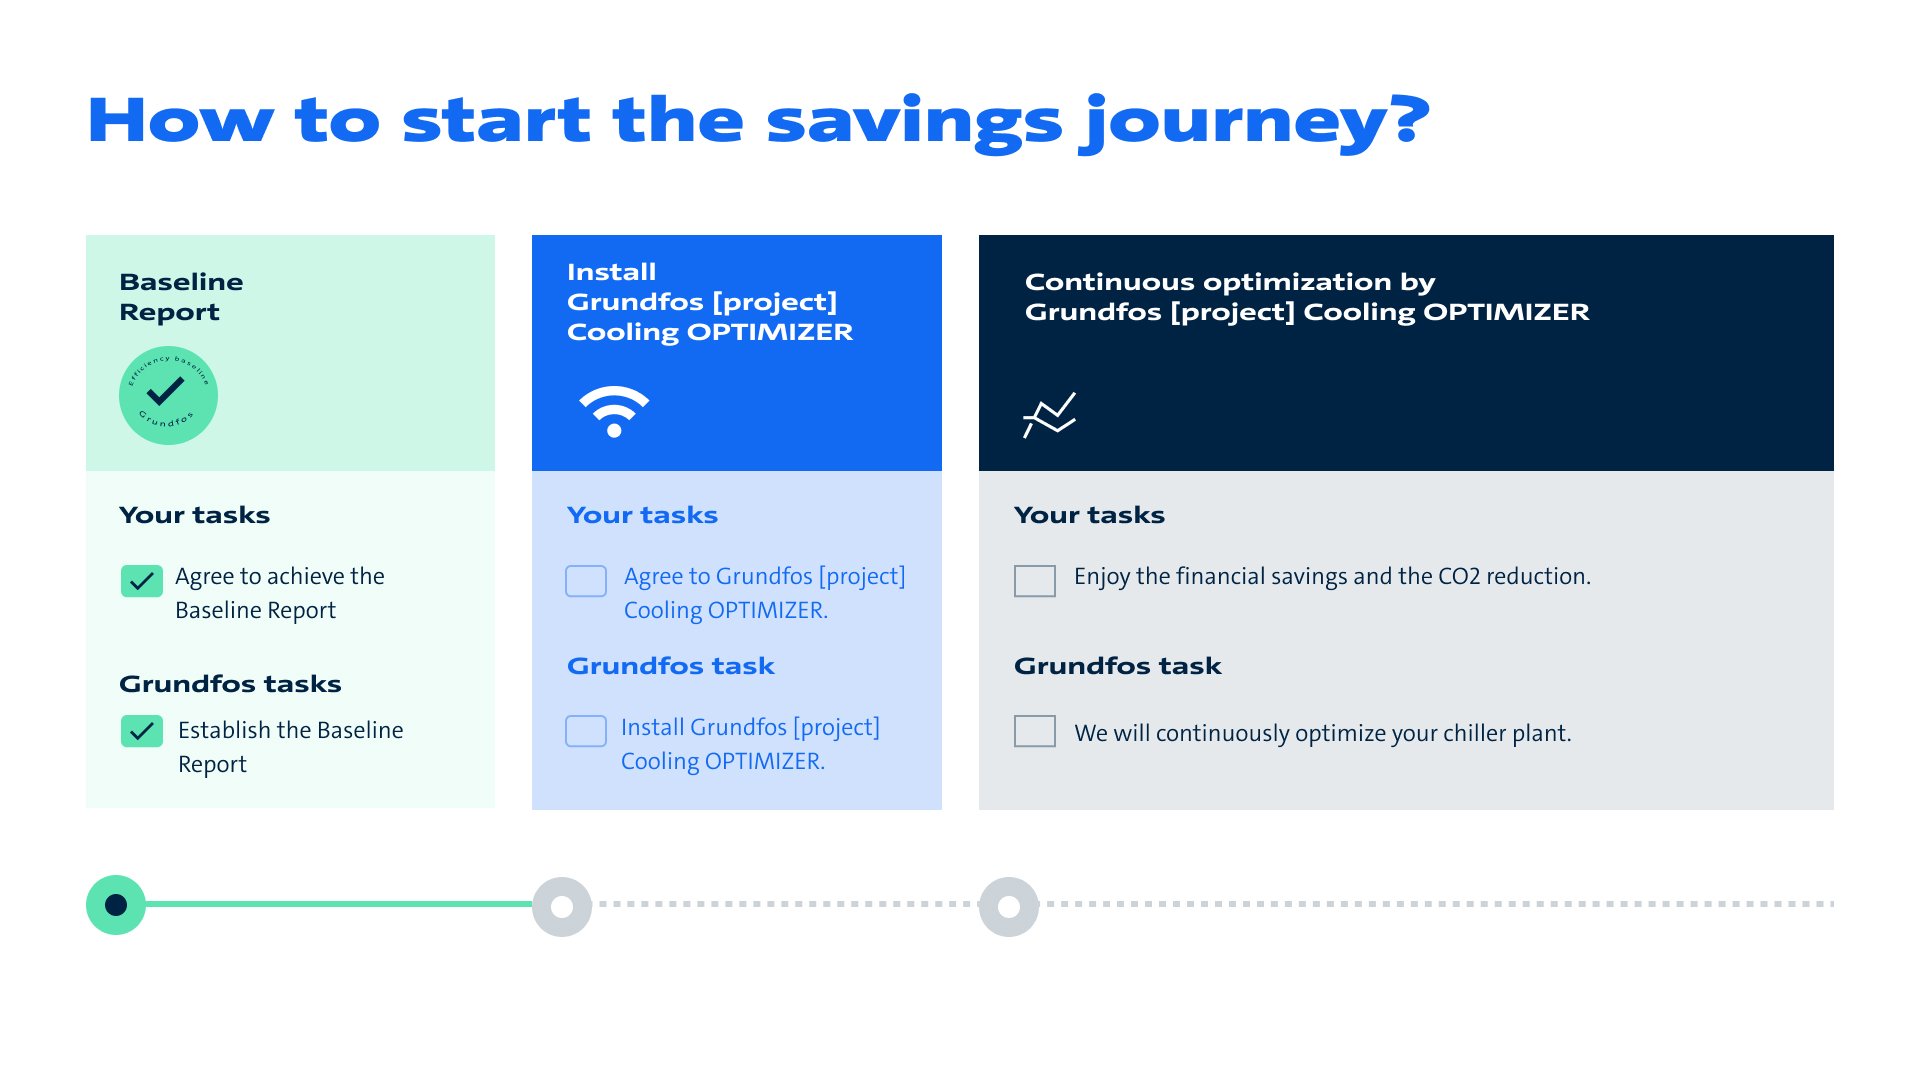 How to start the savings journey